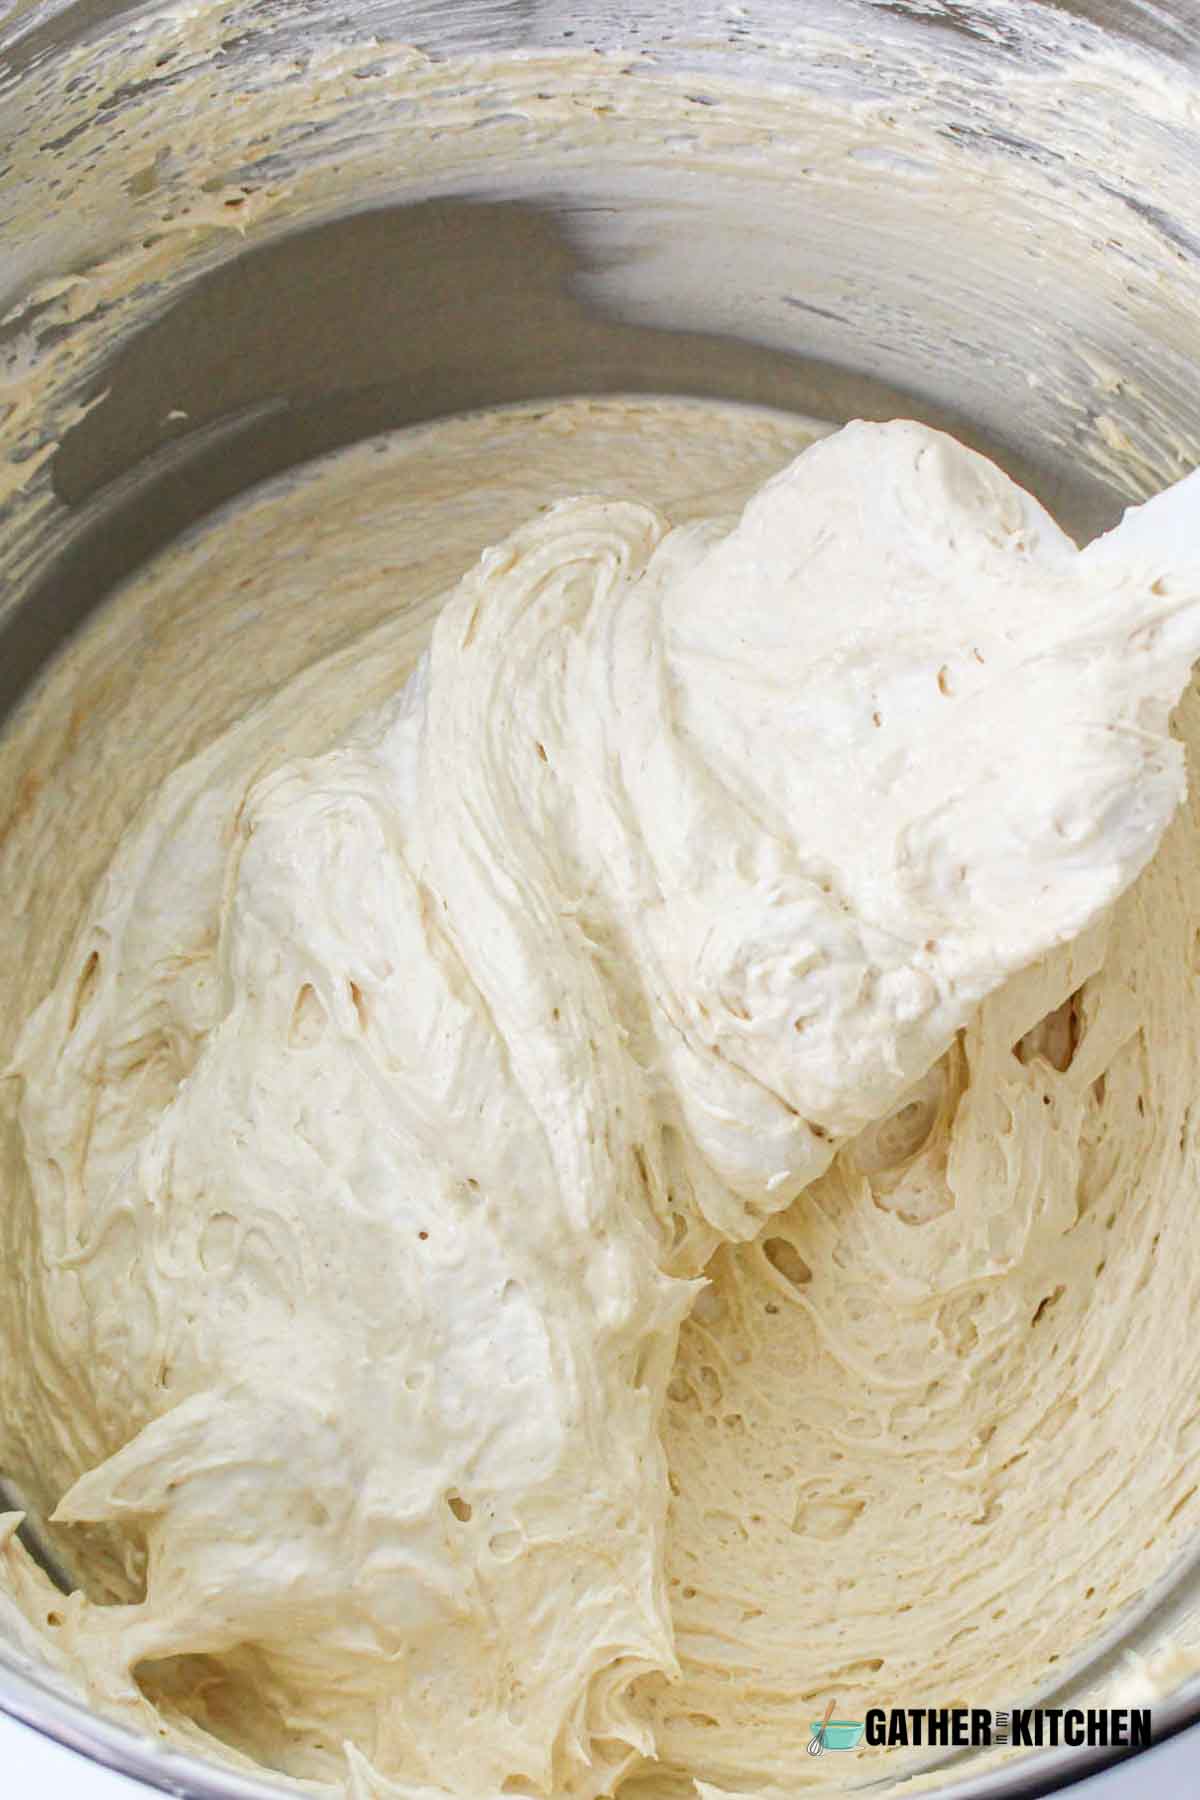 Remaining whipped topping added to the peanut butter mixture.